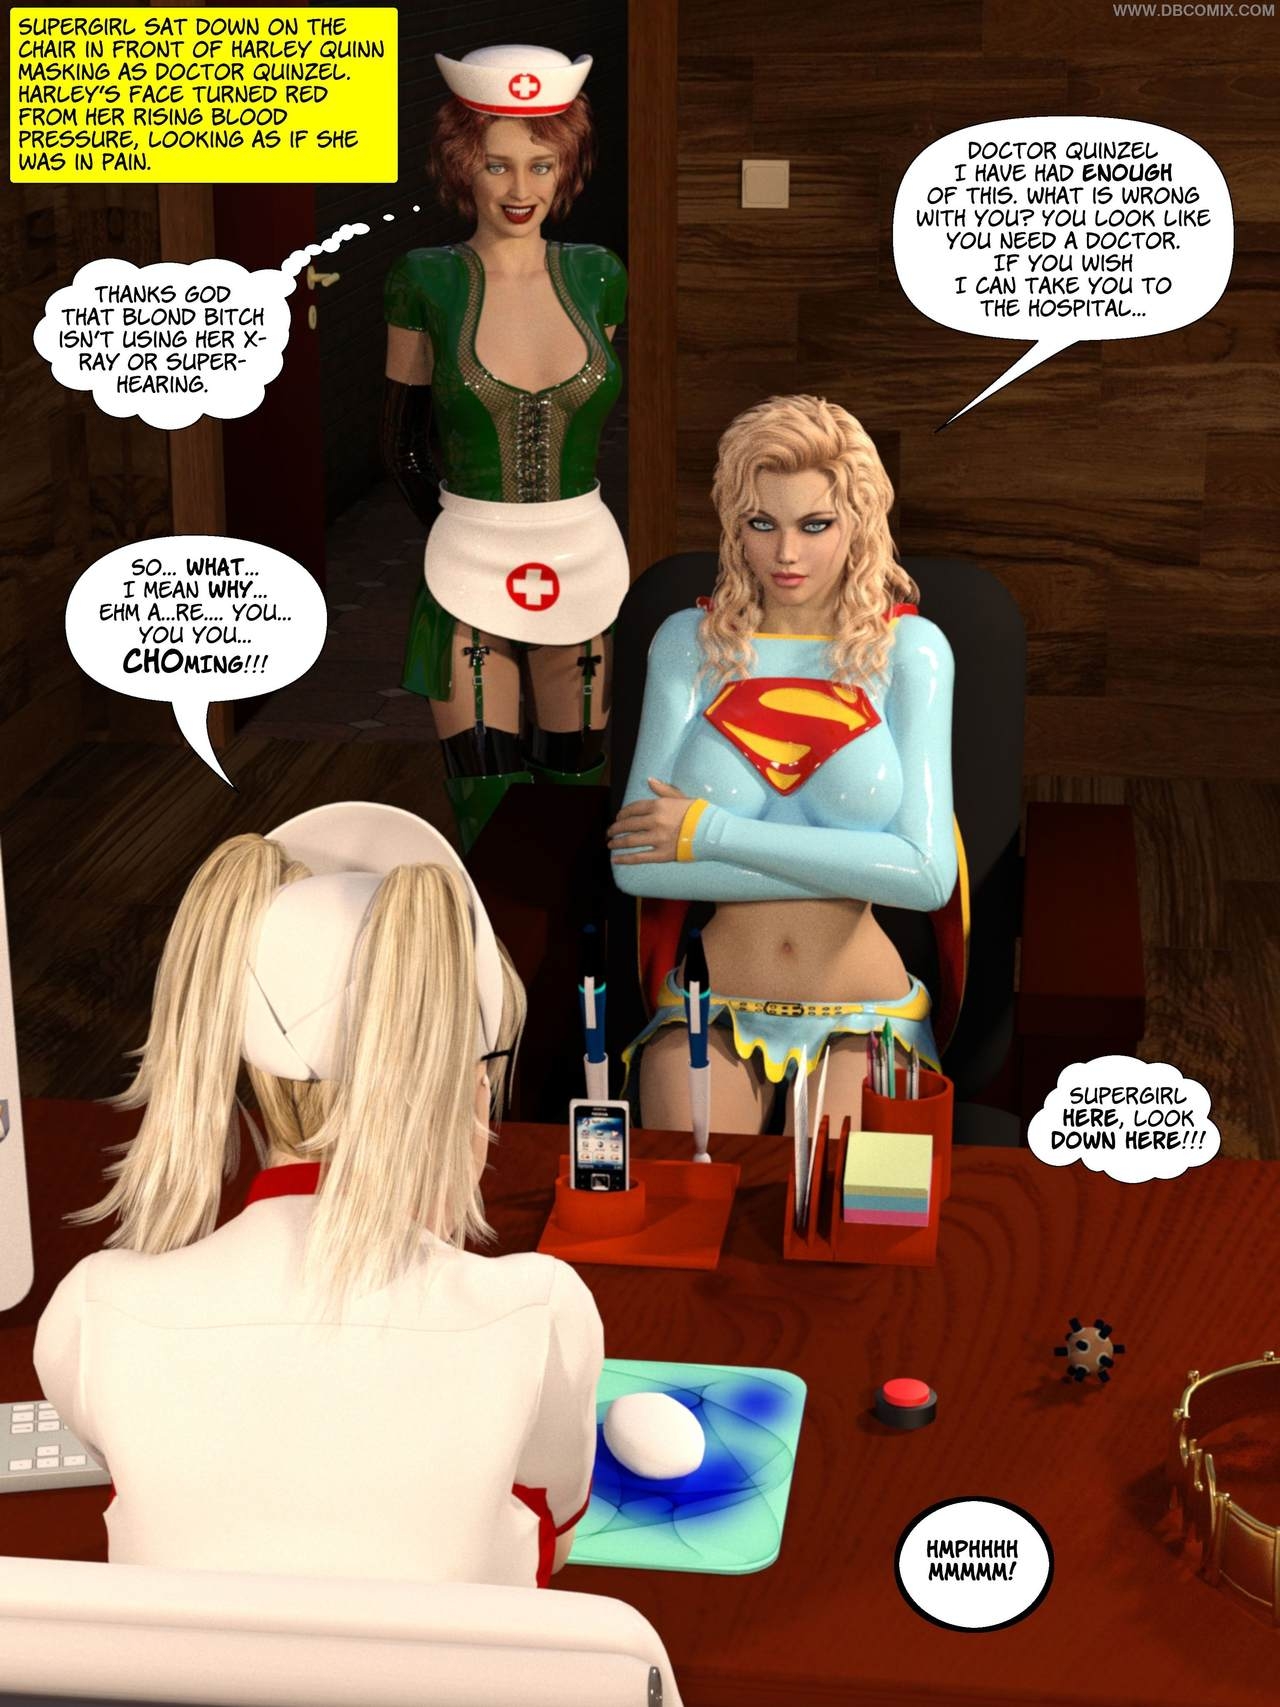 [DBComix] New Arkham for Superheroines 5 - All Work and No Play 67